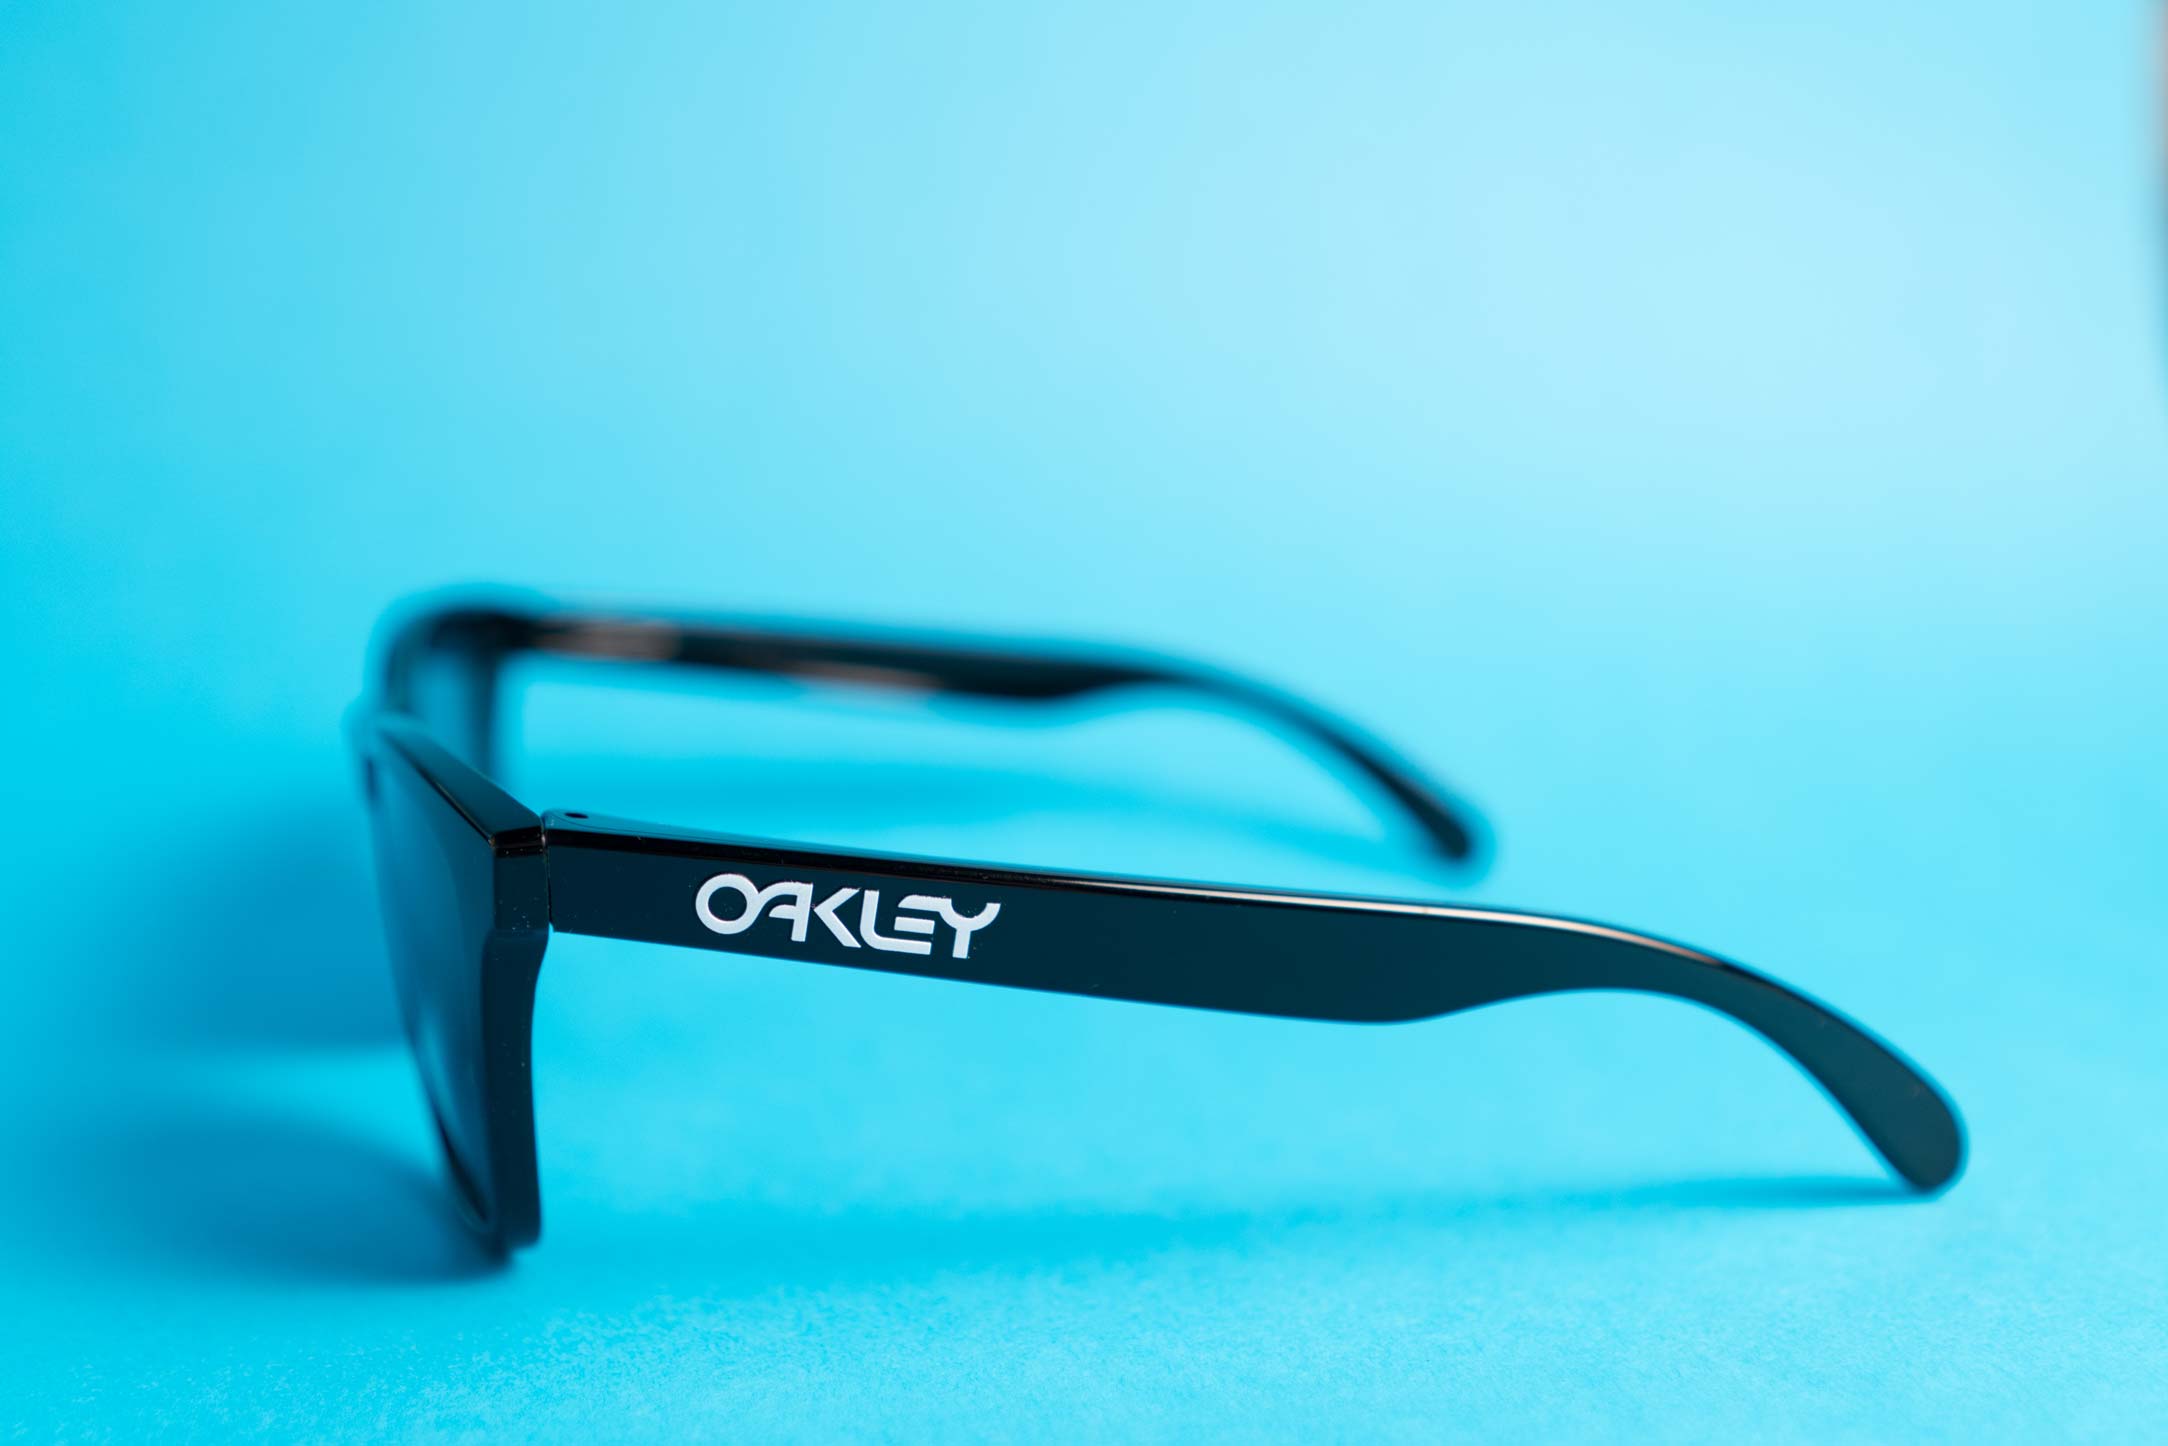 How to spot authentic oakley sunglasses brand logo